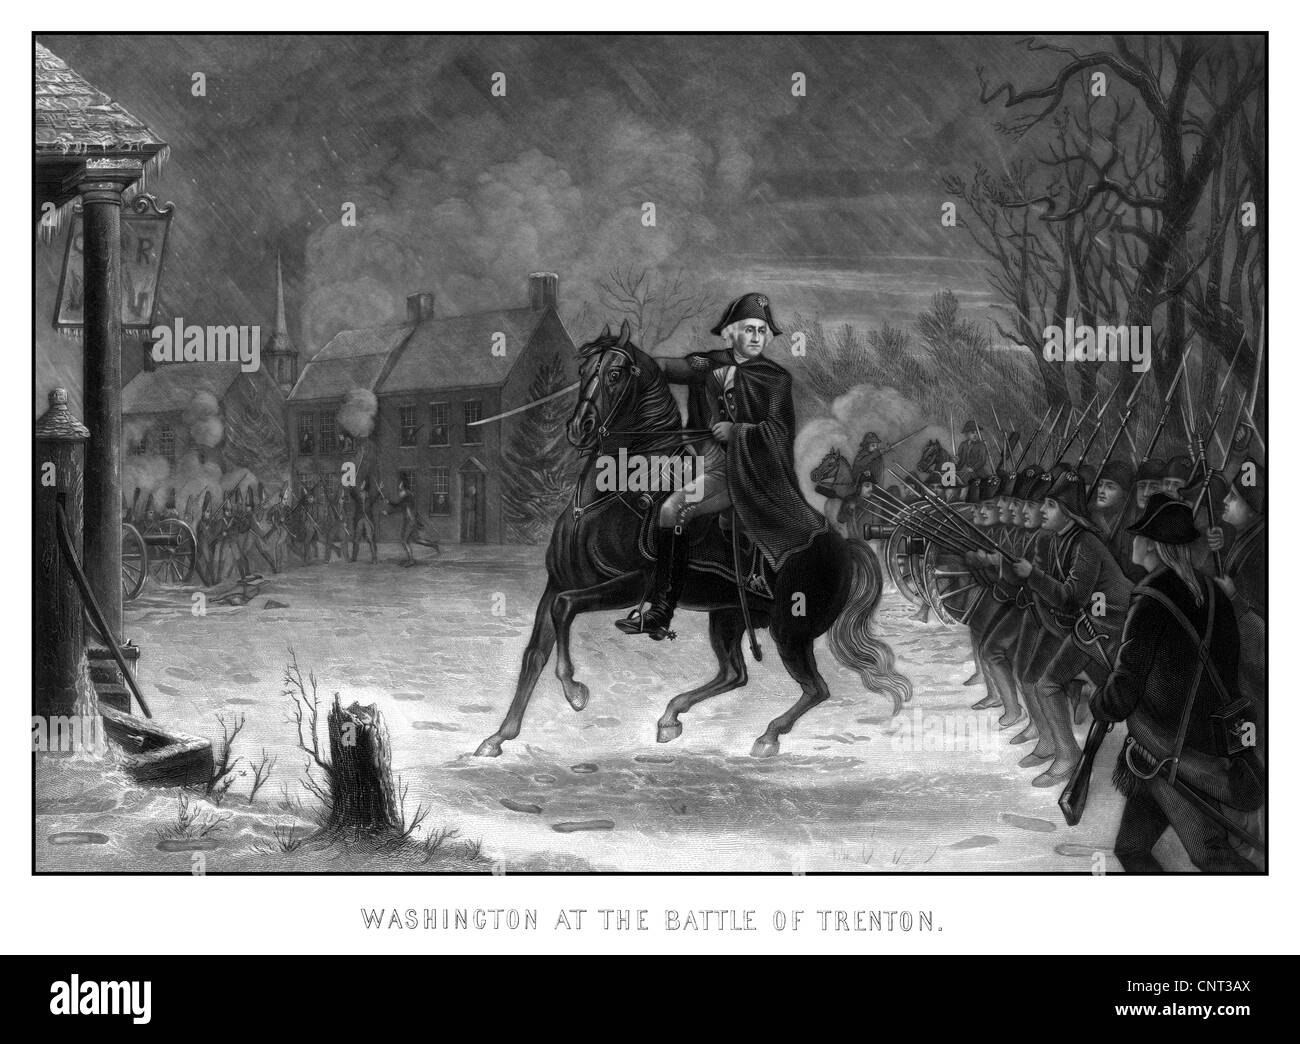 Vintage American History print of General George Washington on his horse leading armed troops at The Battle of Trenton. Stock Photo